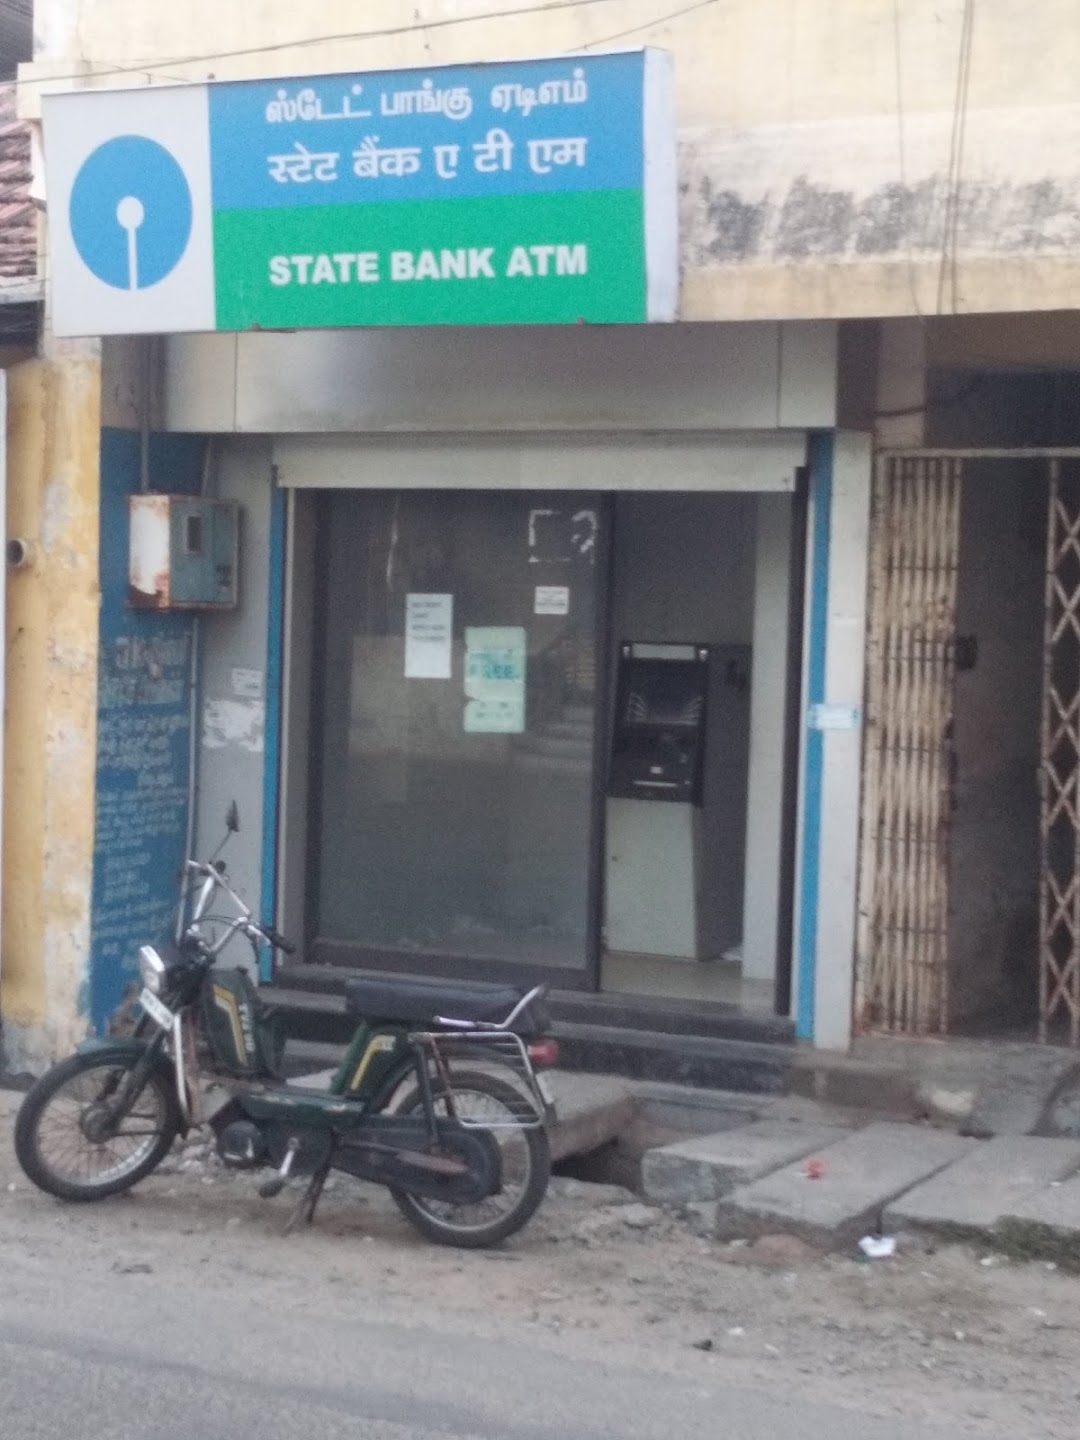 State Bank ATM 